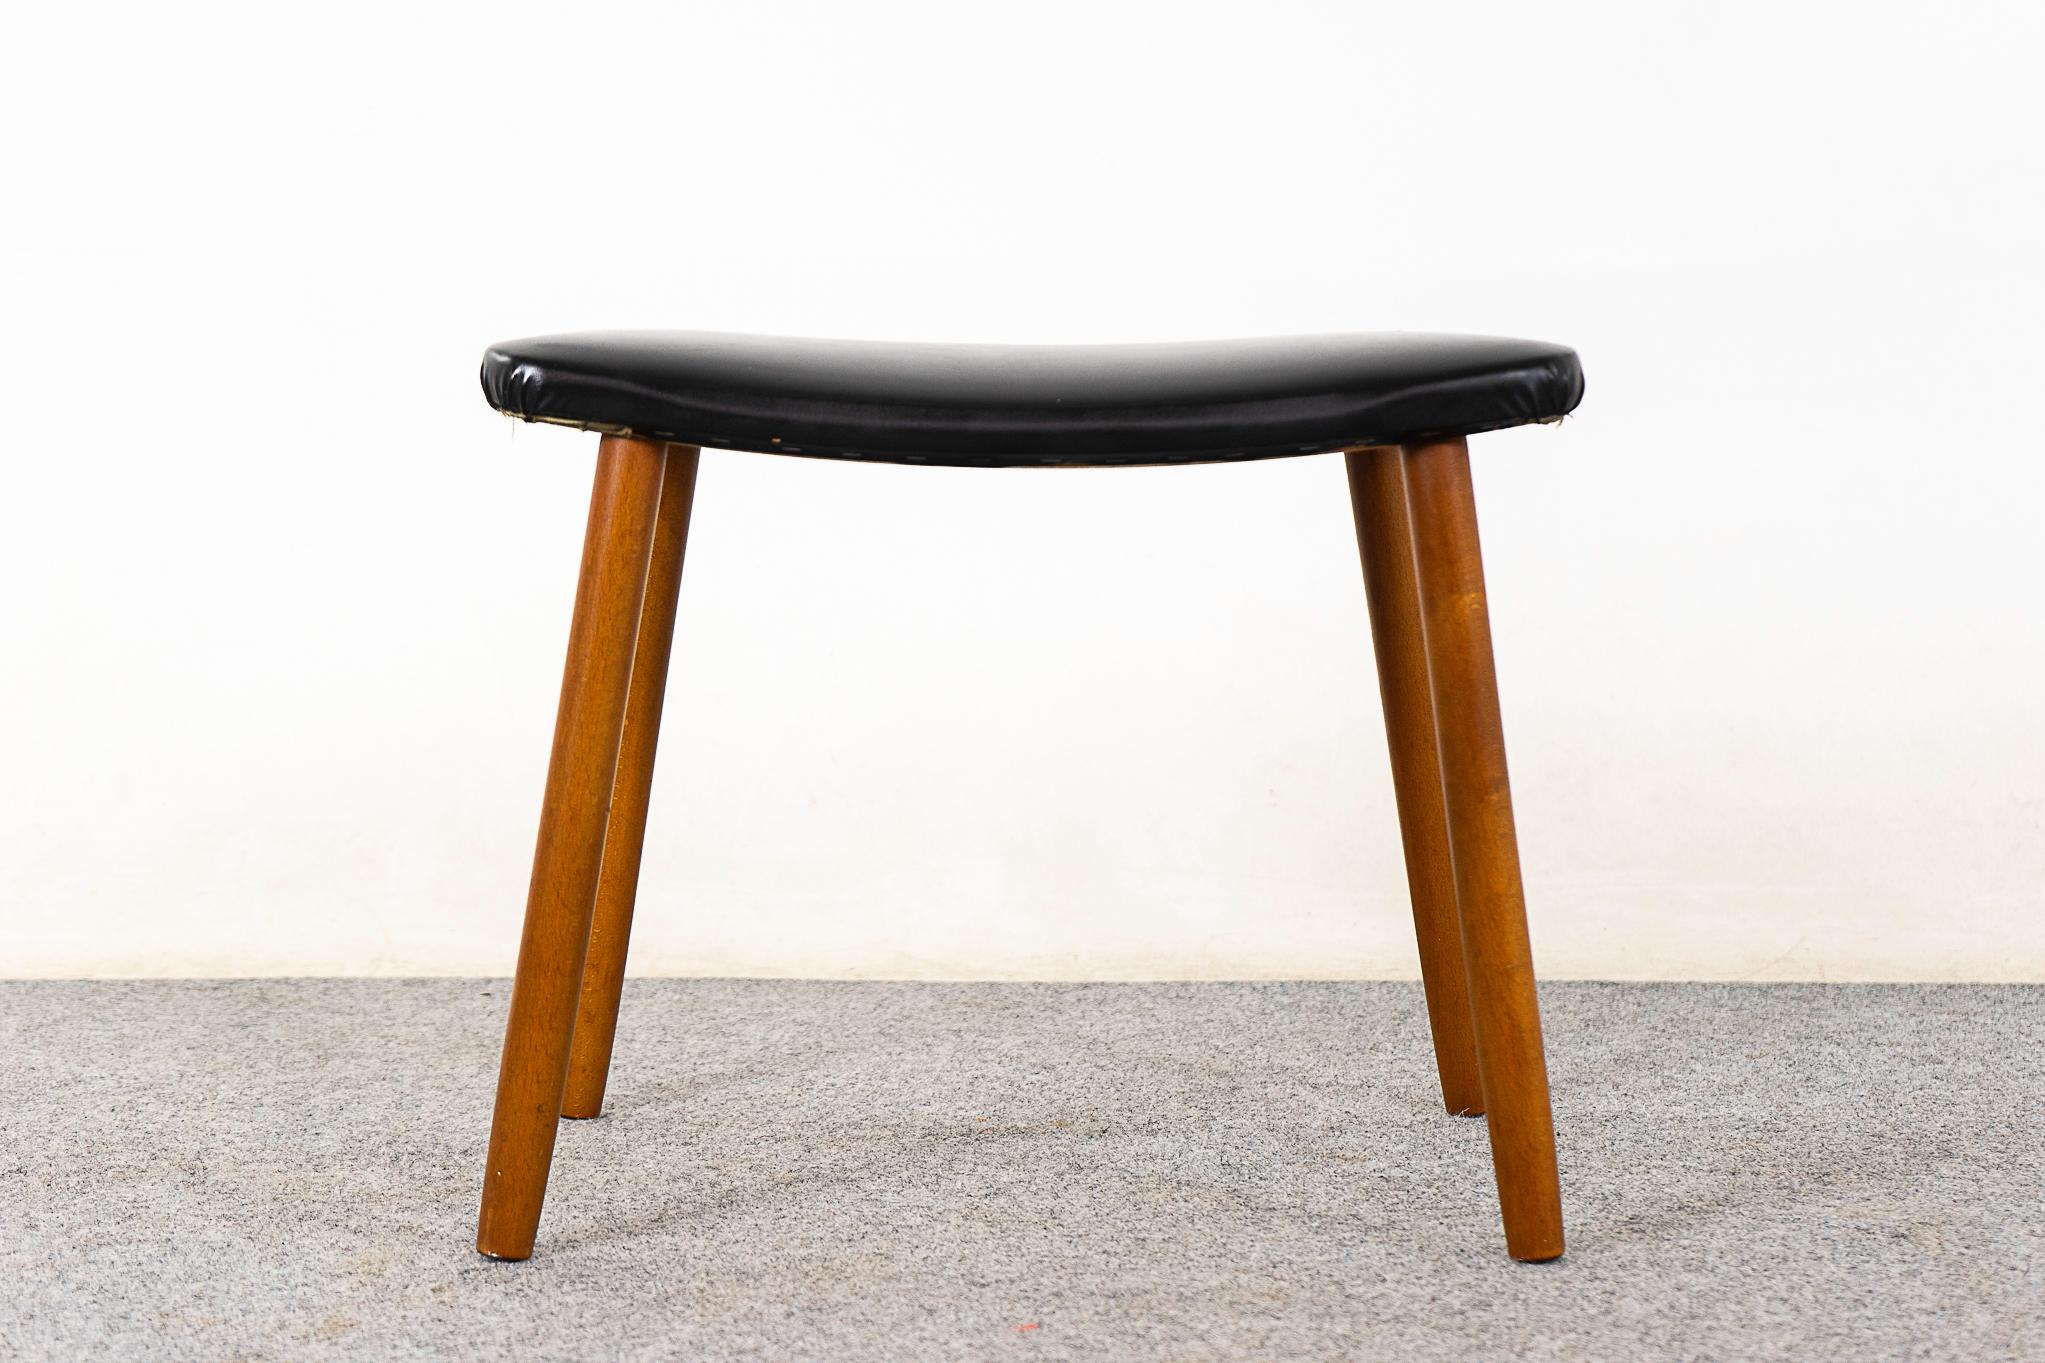 Beech footstool, circa 1960's. Removable legs and original vinyl with minor wear and tear.